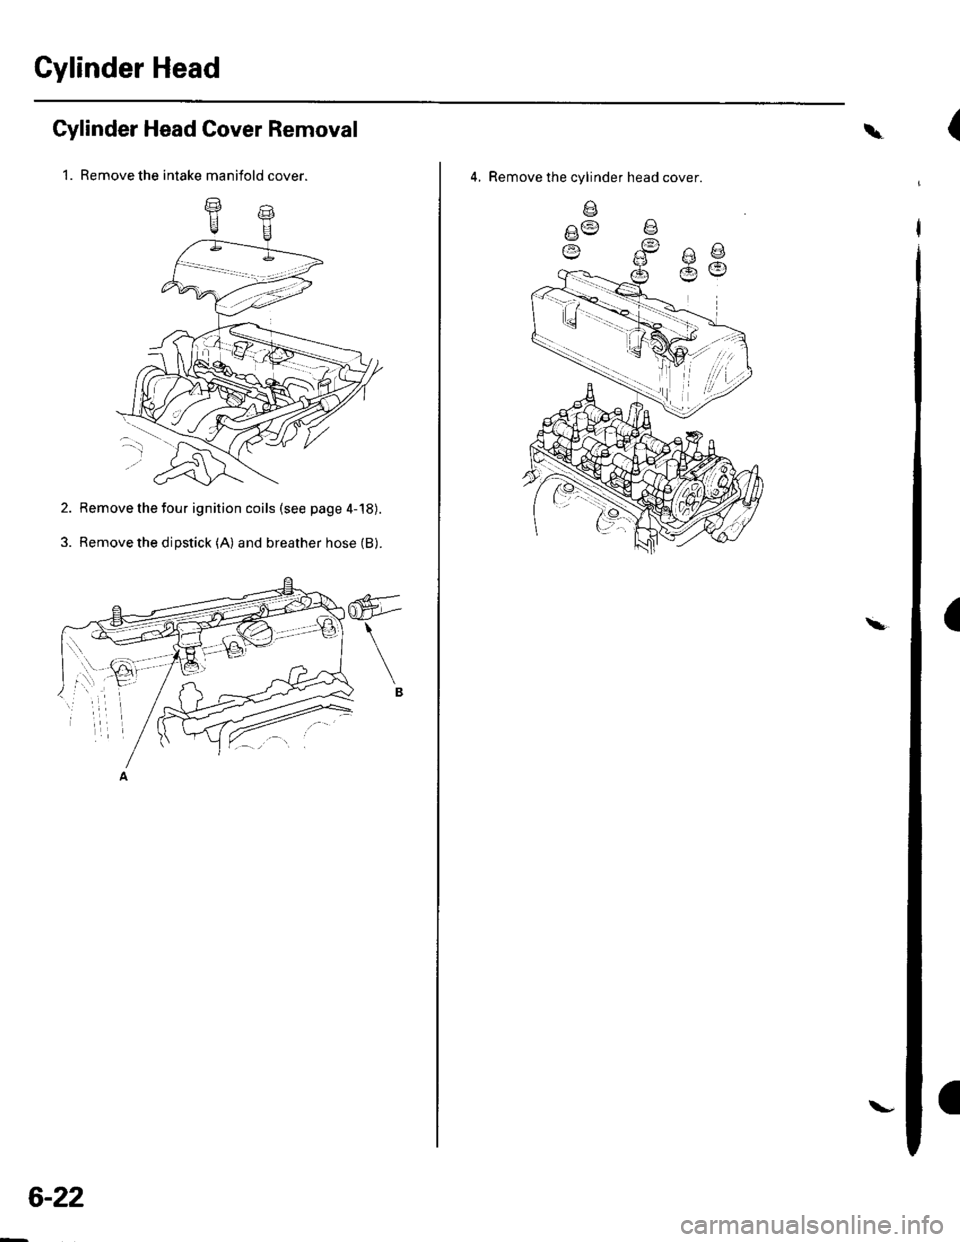 HONDA CIVIC 2003 7.G Workshop Manual Gylinder Head
Cylinder Head Cover Removal
1. Remove the intake manifold cover.
2. Remove the four ignition coils (see page 4-18).
3. Remove the dipstick (A) and breather hose (B).
6-22
\-
\
4, Remove